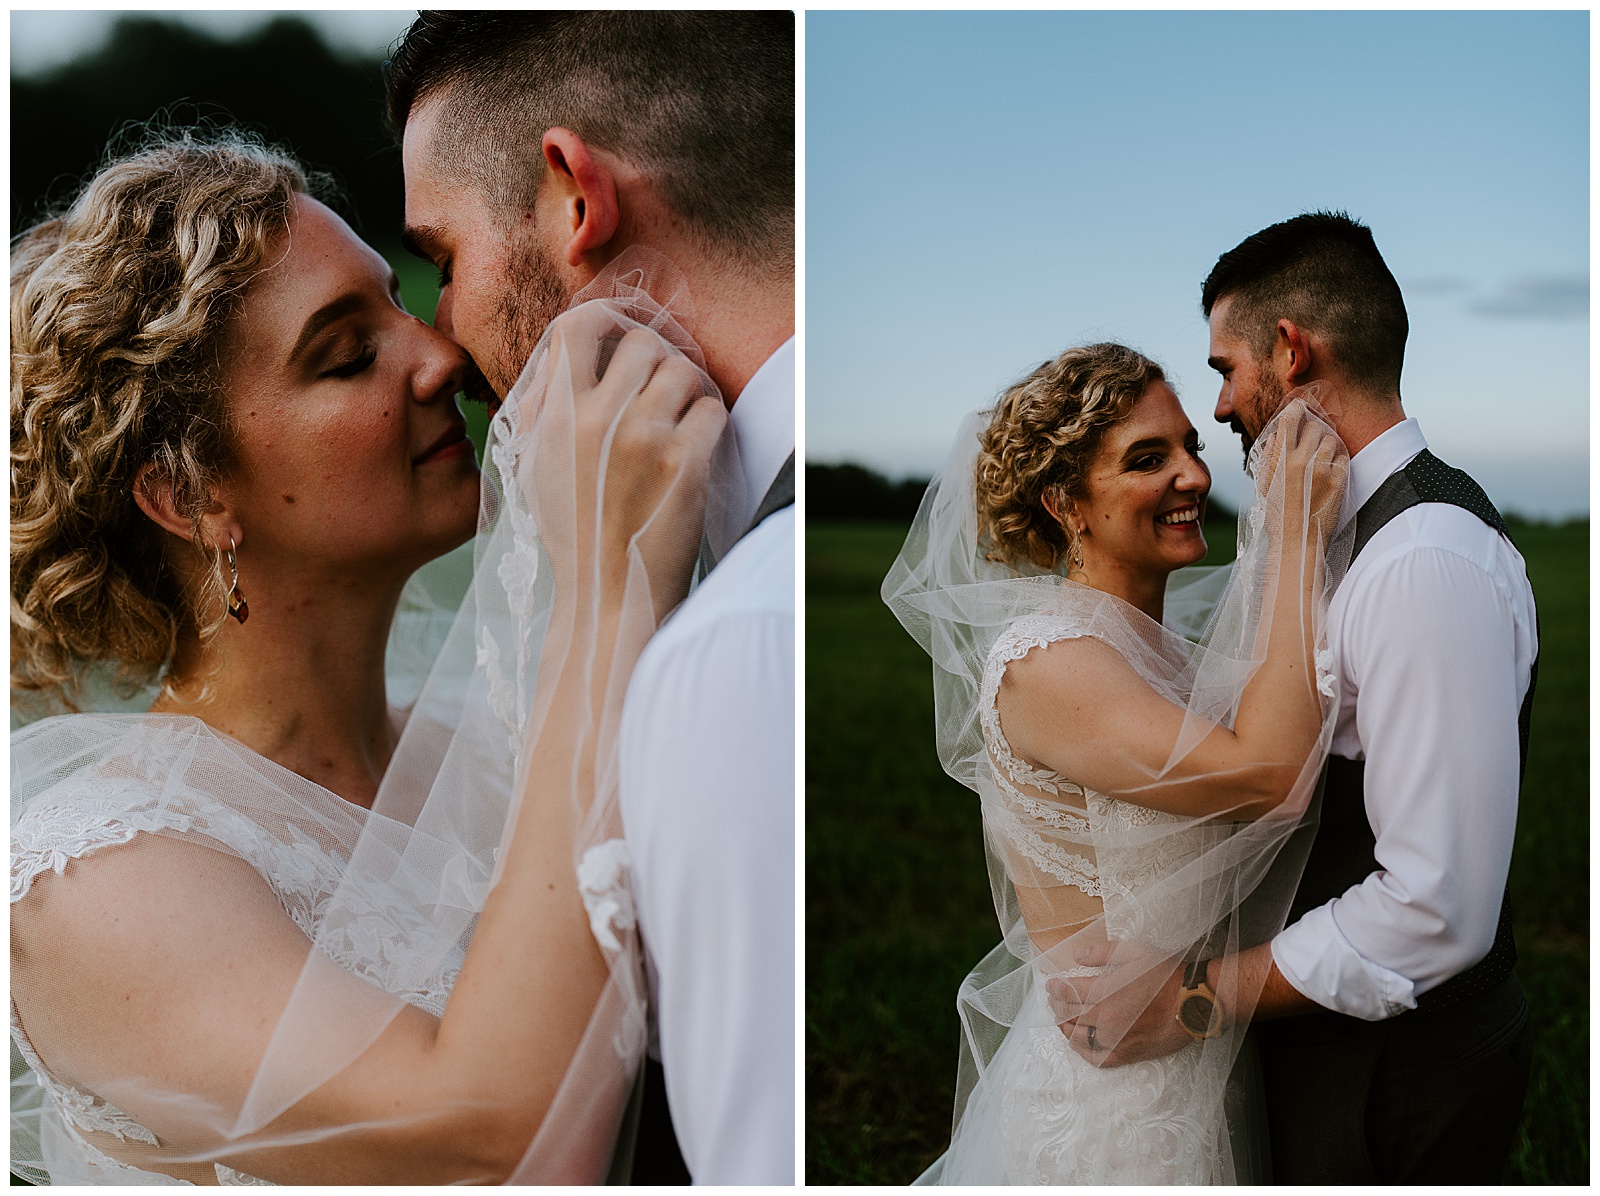 romantic and intimate wedding pictures, pride and prejudice wedding, emotional wedding, emotional bride and groom, sunset wedding photos, dreamy bride and groom, romantic kiss, 